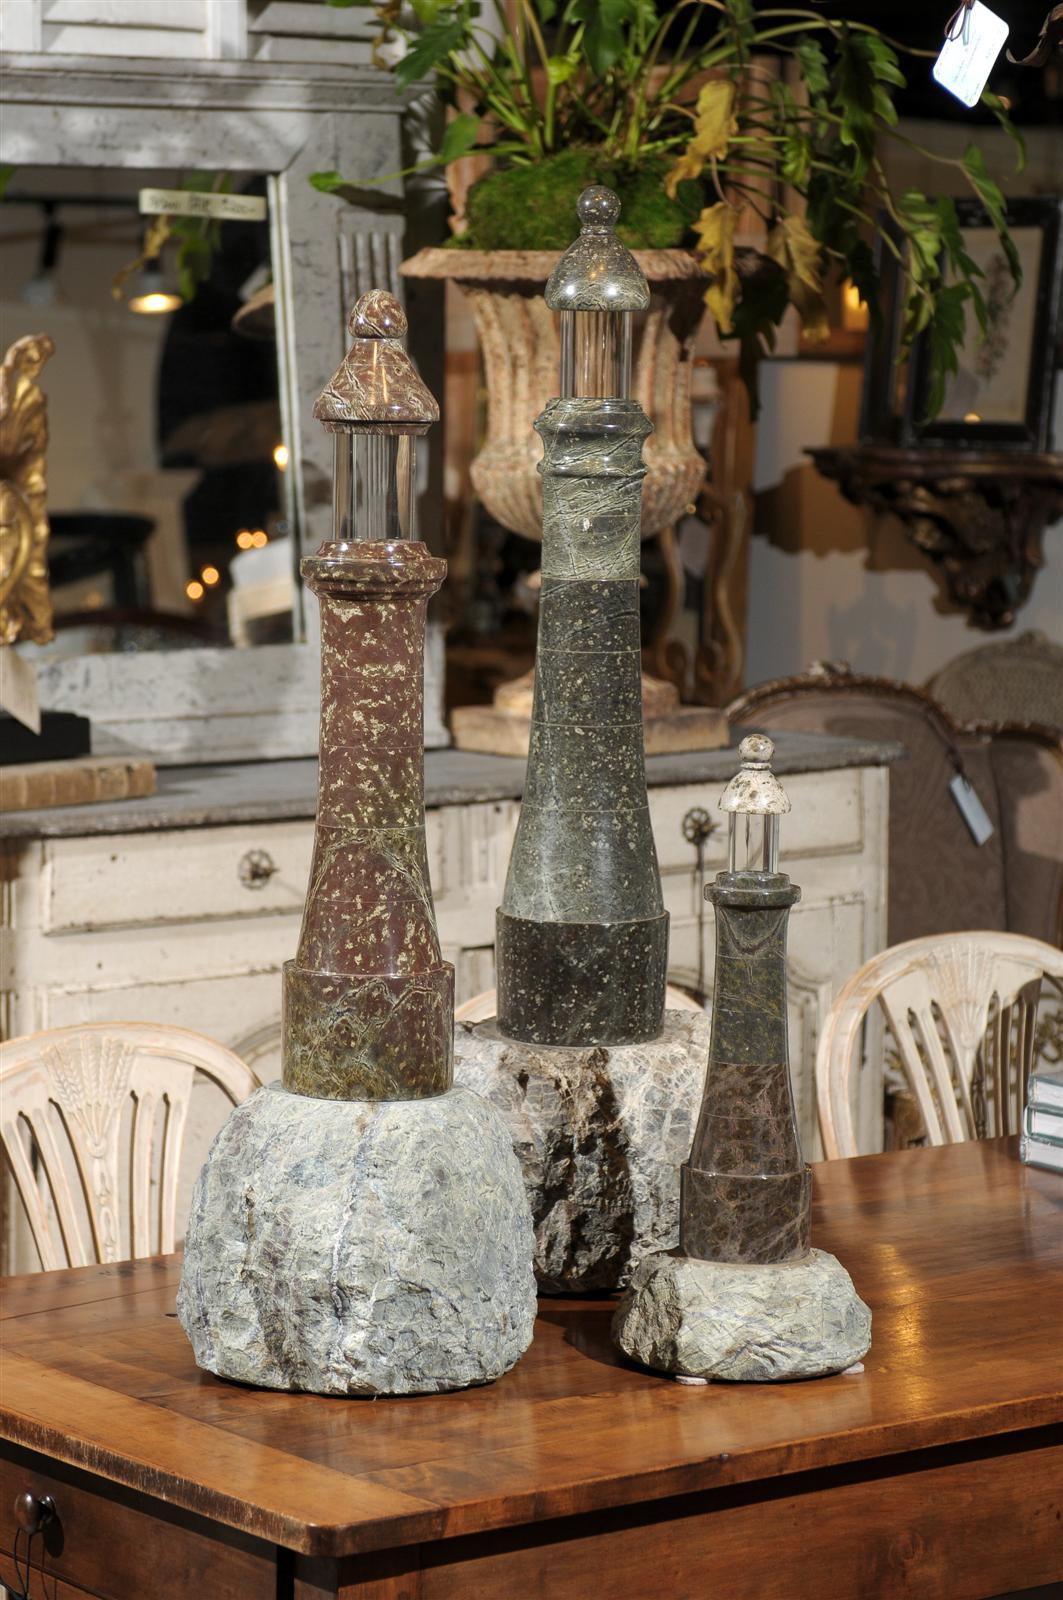 A set of three English grey and reddish-brown veined marble and stone decorative lighthouse figurines from the late 19th century. These English decorative objects feature three similar looking stepped marble lighthouses raised on stone bases of